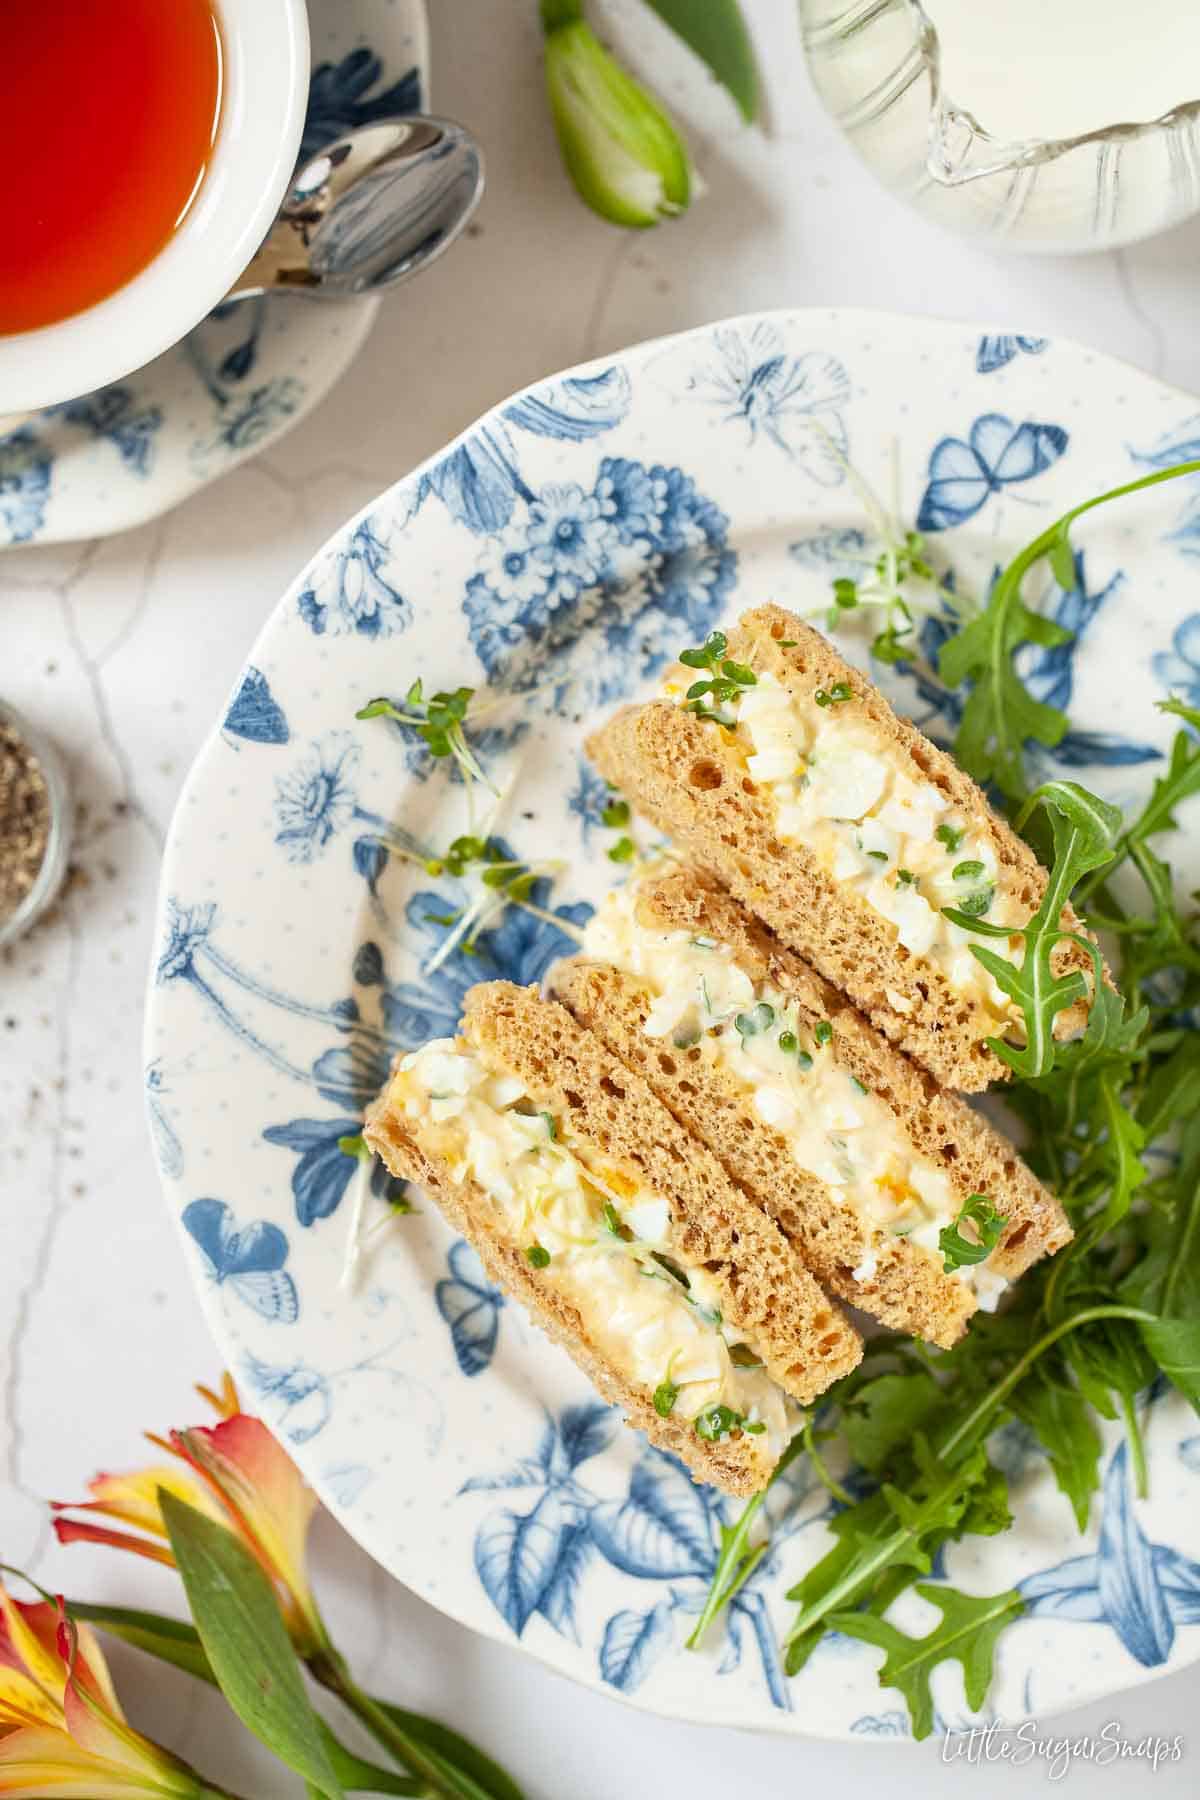 Three small rectangular egg mayo sandwiches on a floral plate